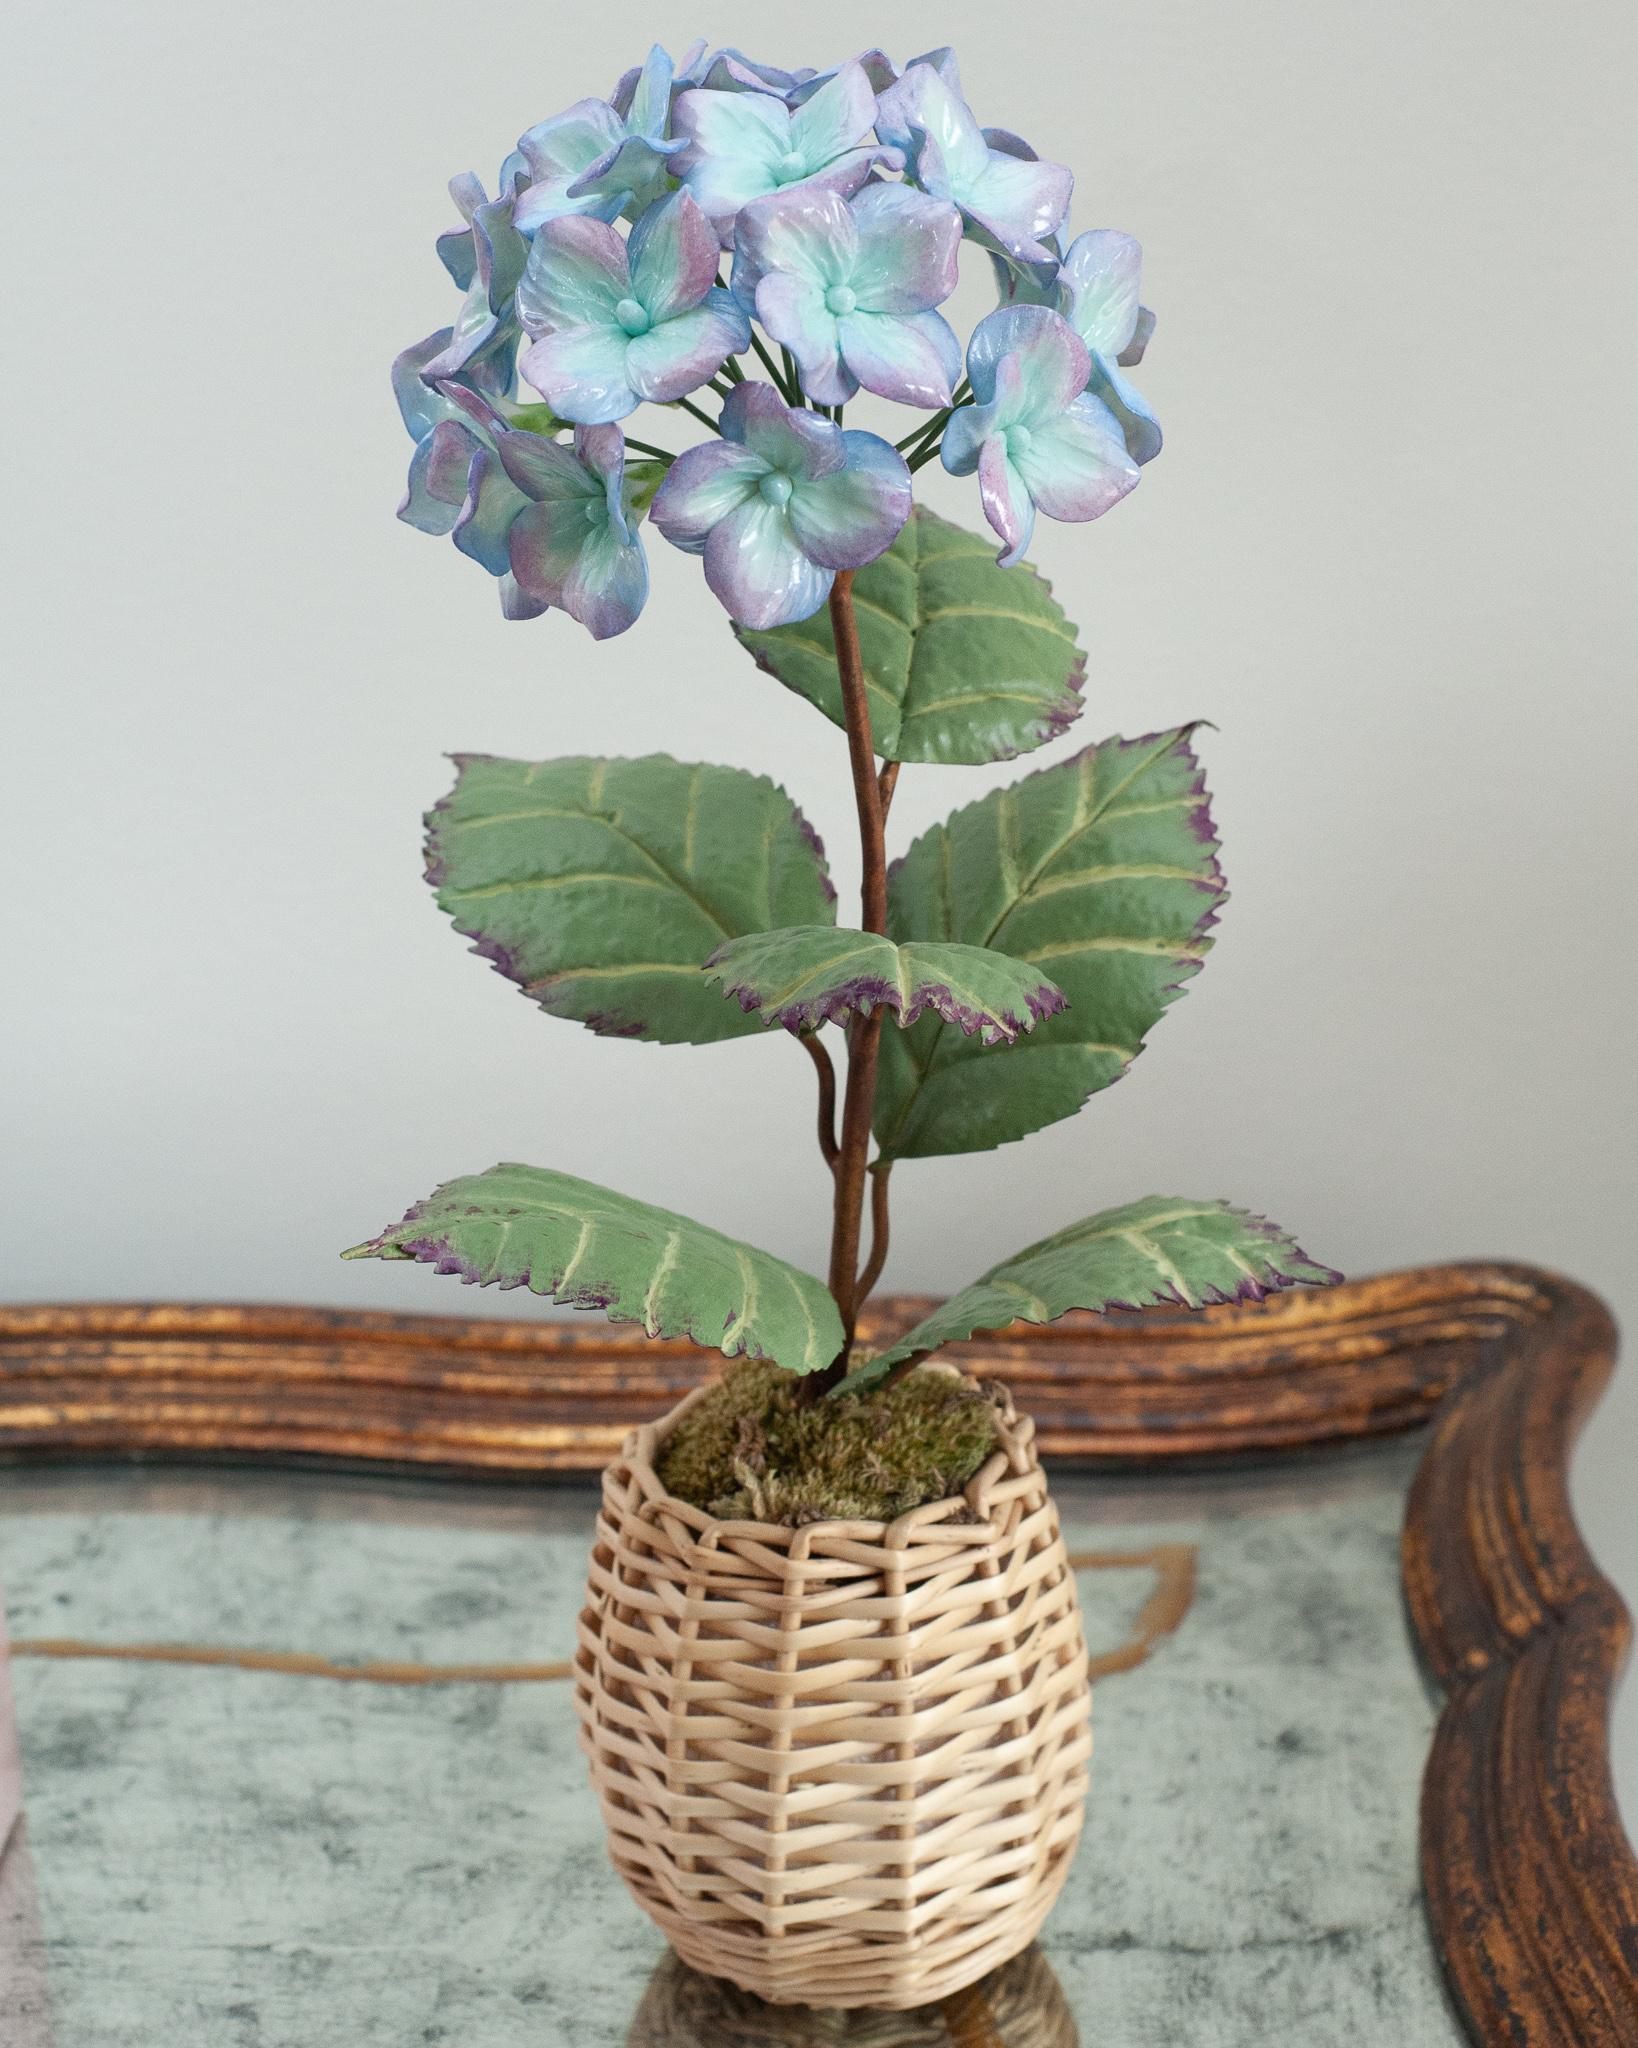 Enhance your table with these delicate porcelain flowers by French artist Samuel Mazy. This purple and blue hydrangea is handmade in glazed porcelain, with handpainted copper leaves and stems, and is placed in a wicker pot. 
An exclusive floral